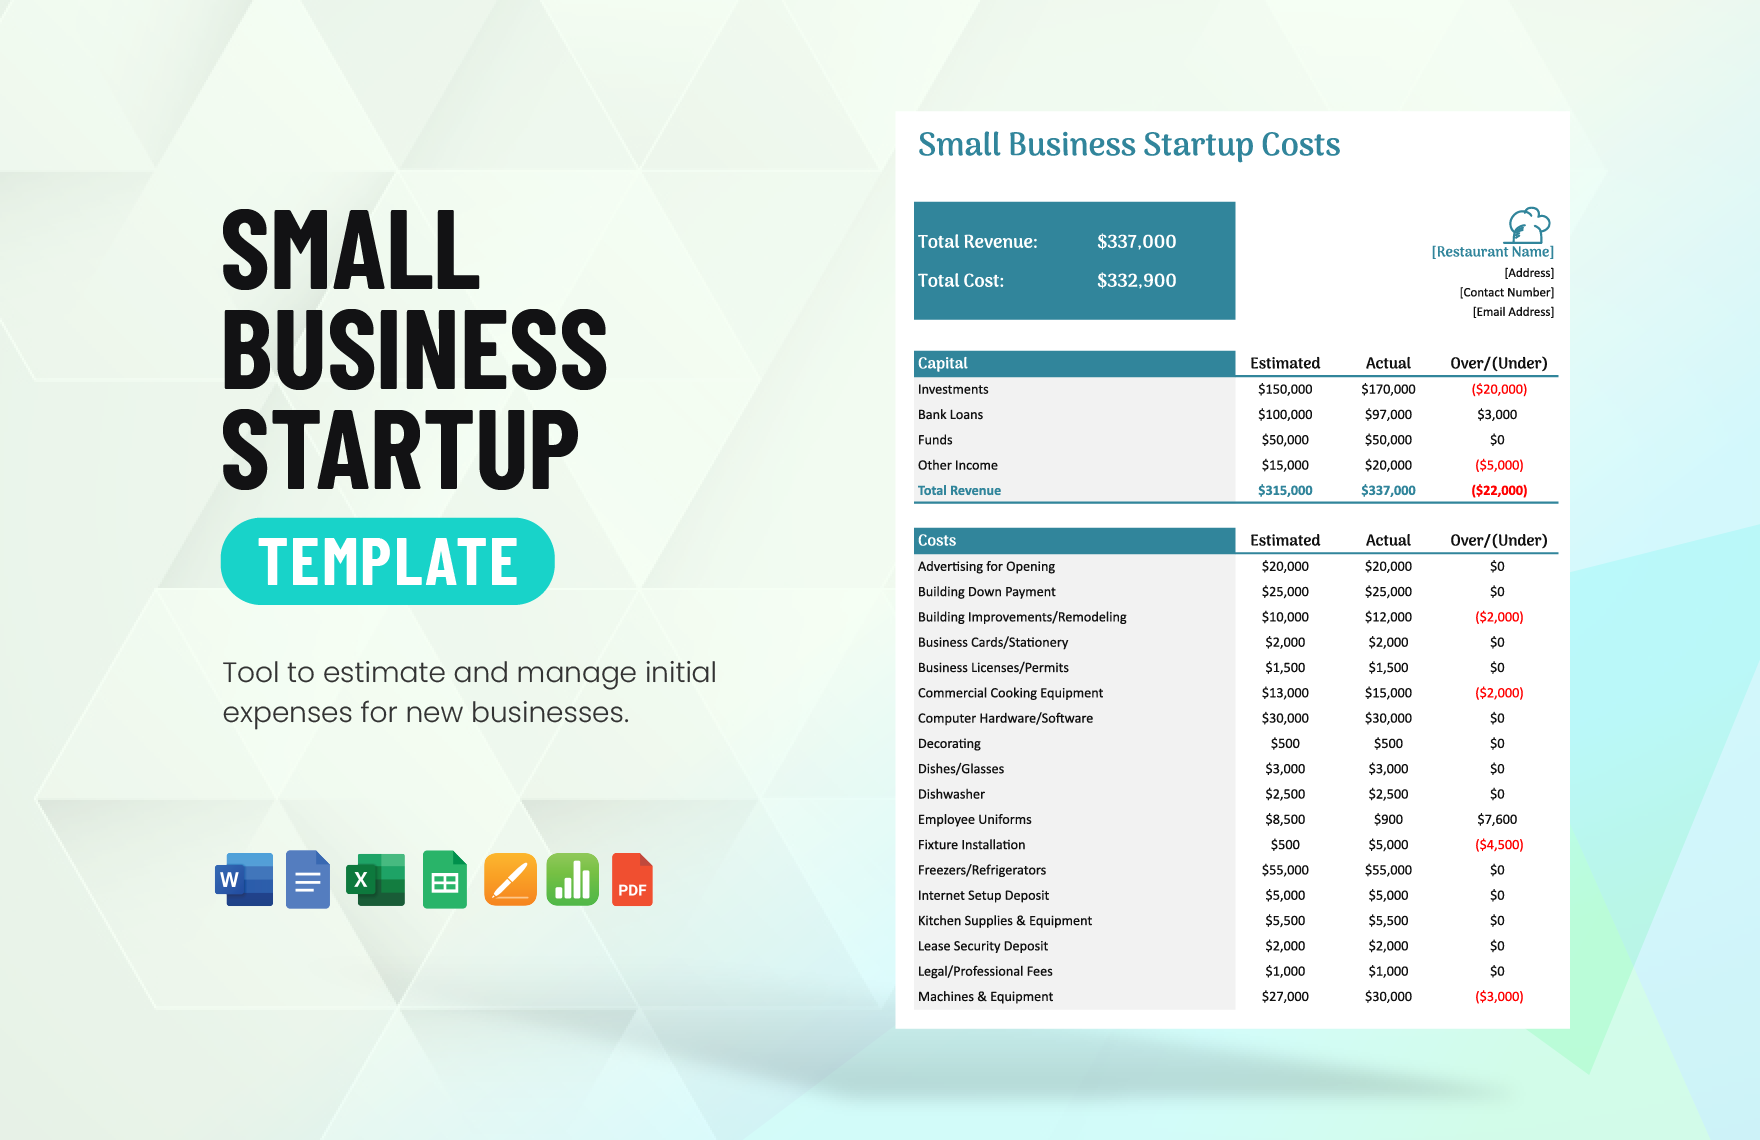 Small Business Start Up Costs Template in Word, Google Docs, Excel, PDF, Google Sheets, Apple Pages, Apple Numbers